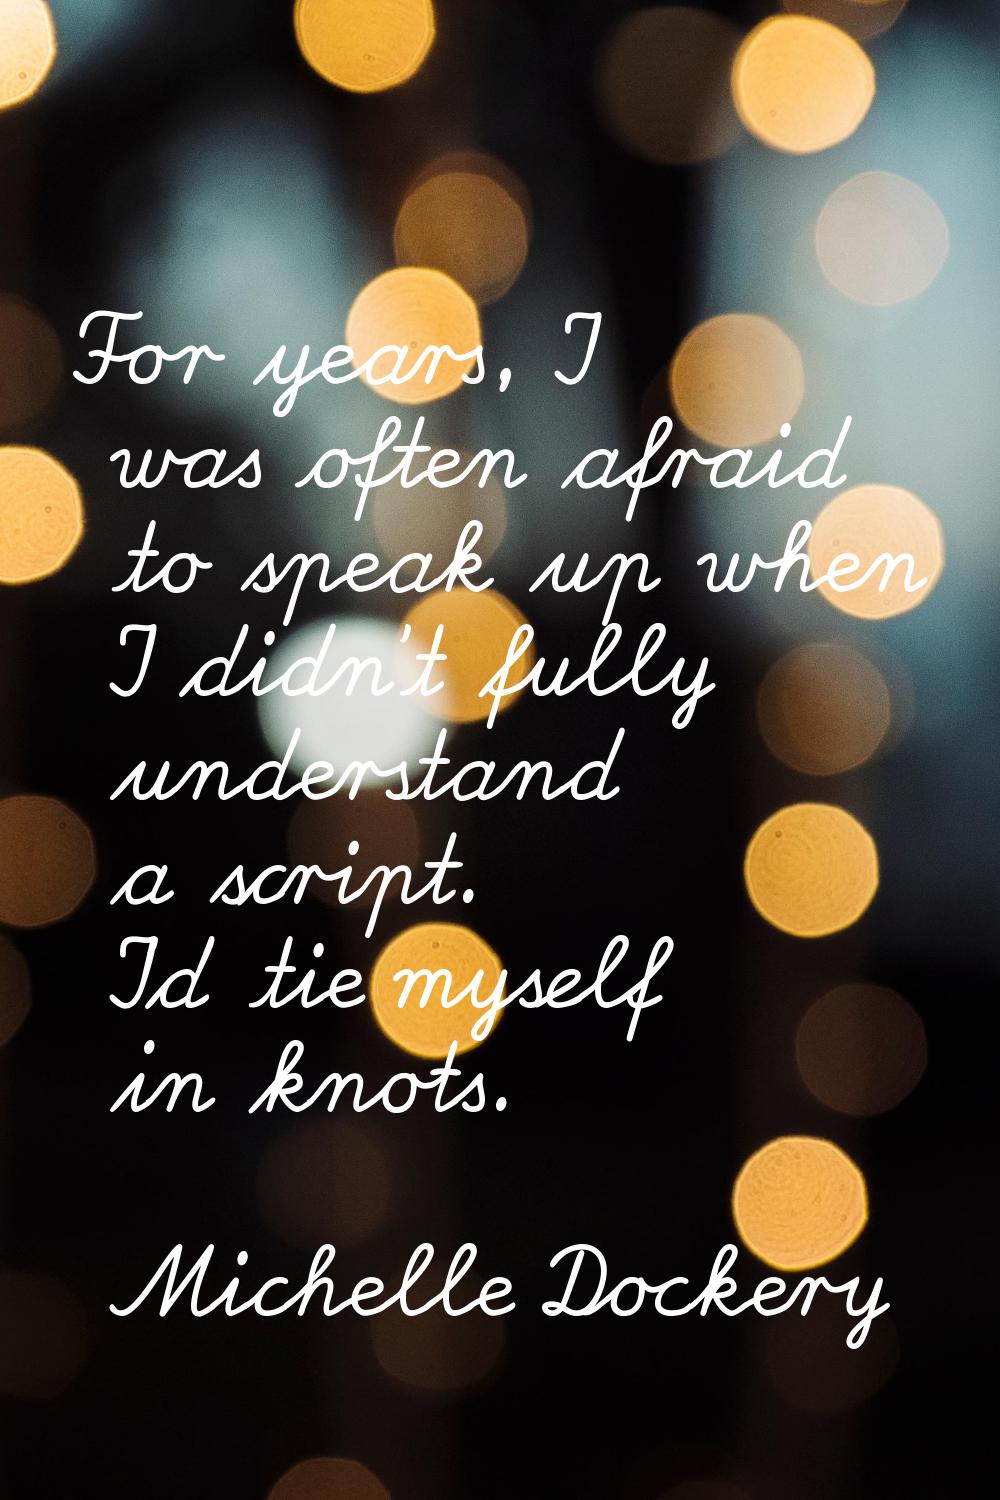 For years, I was often afraid to speak up when I didn't fully understand a script. I'd tie myself i